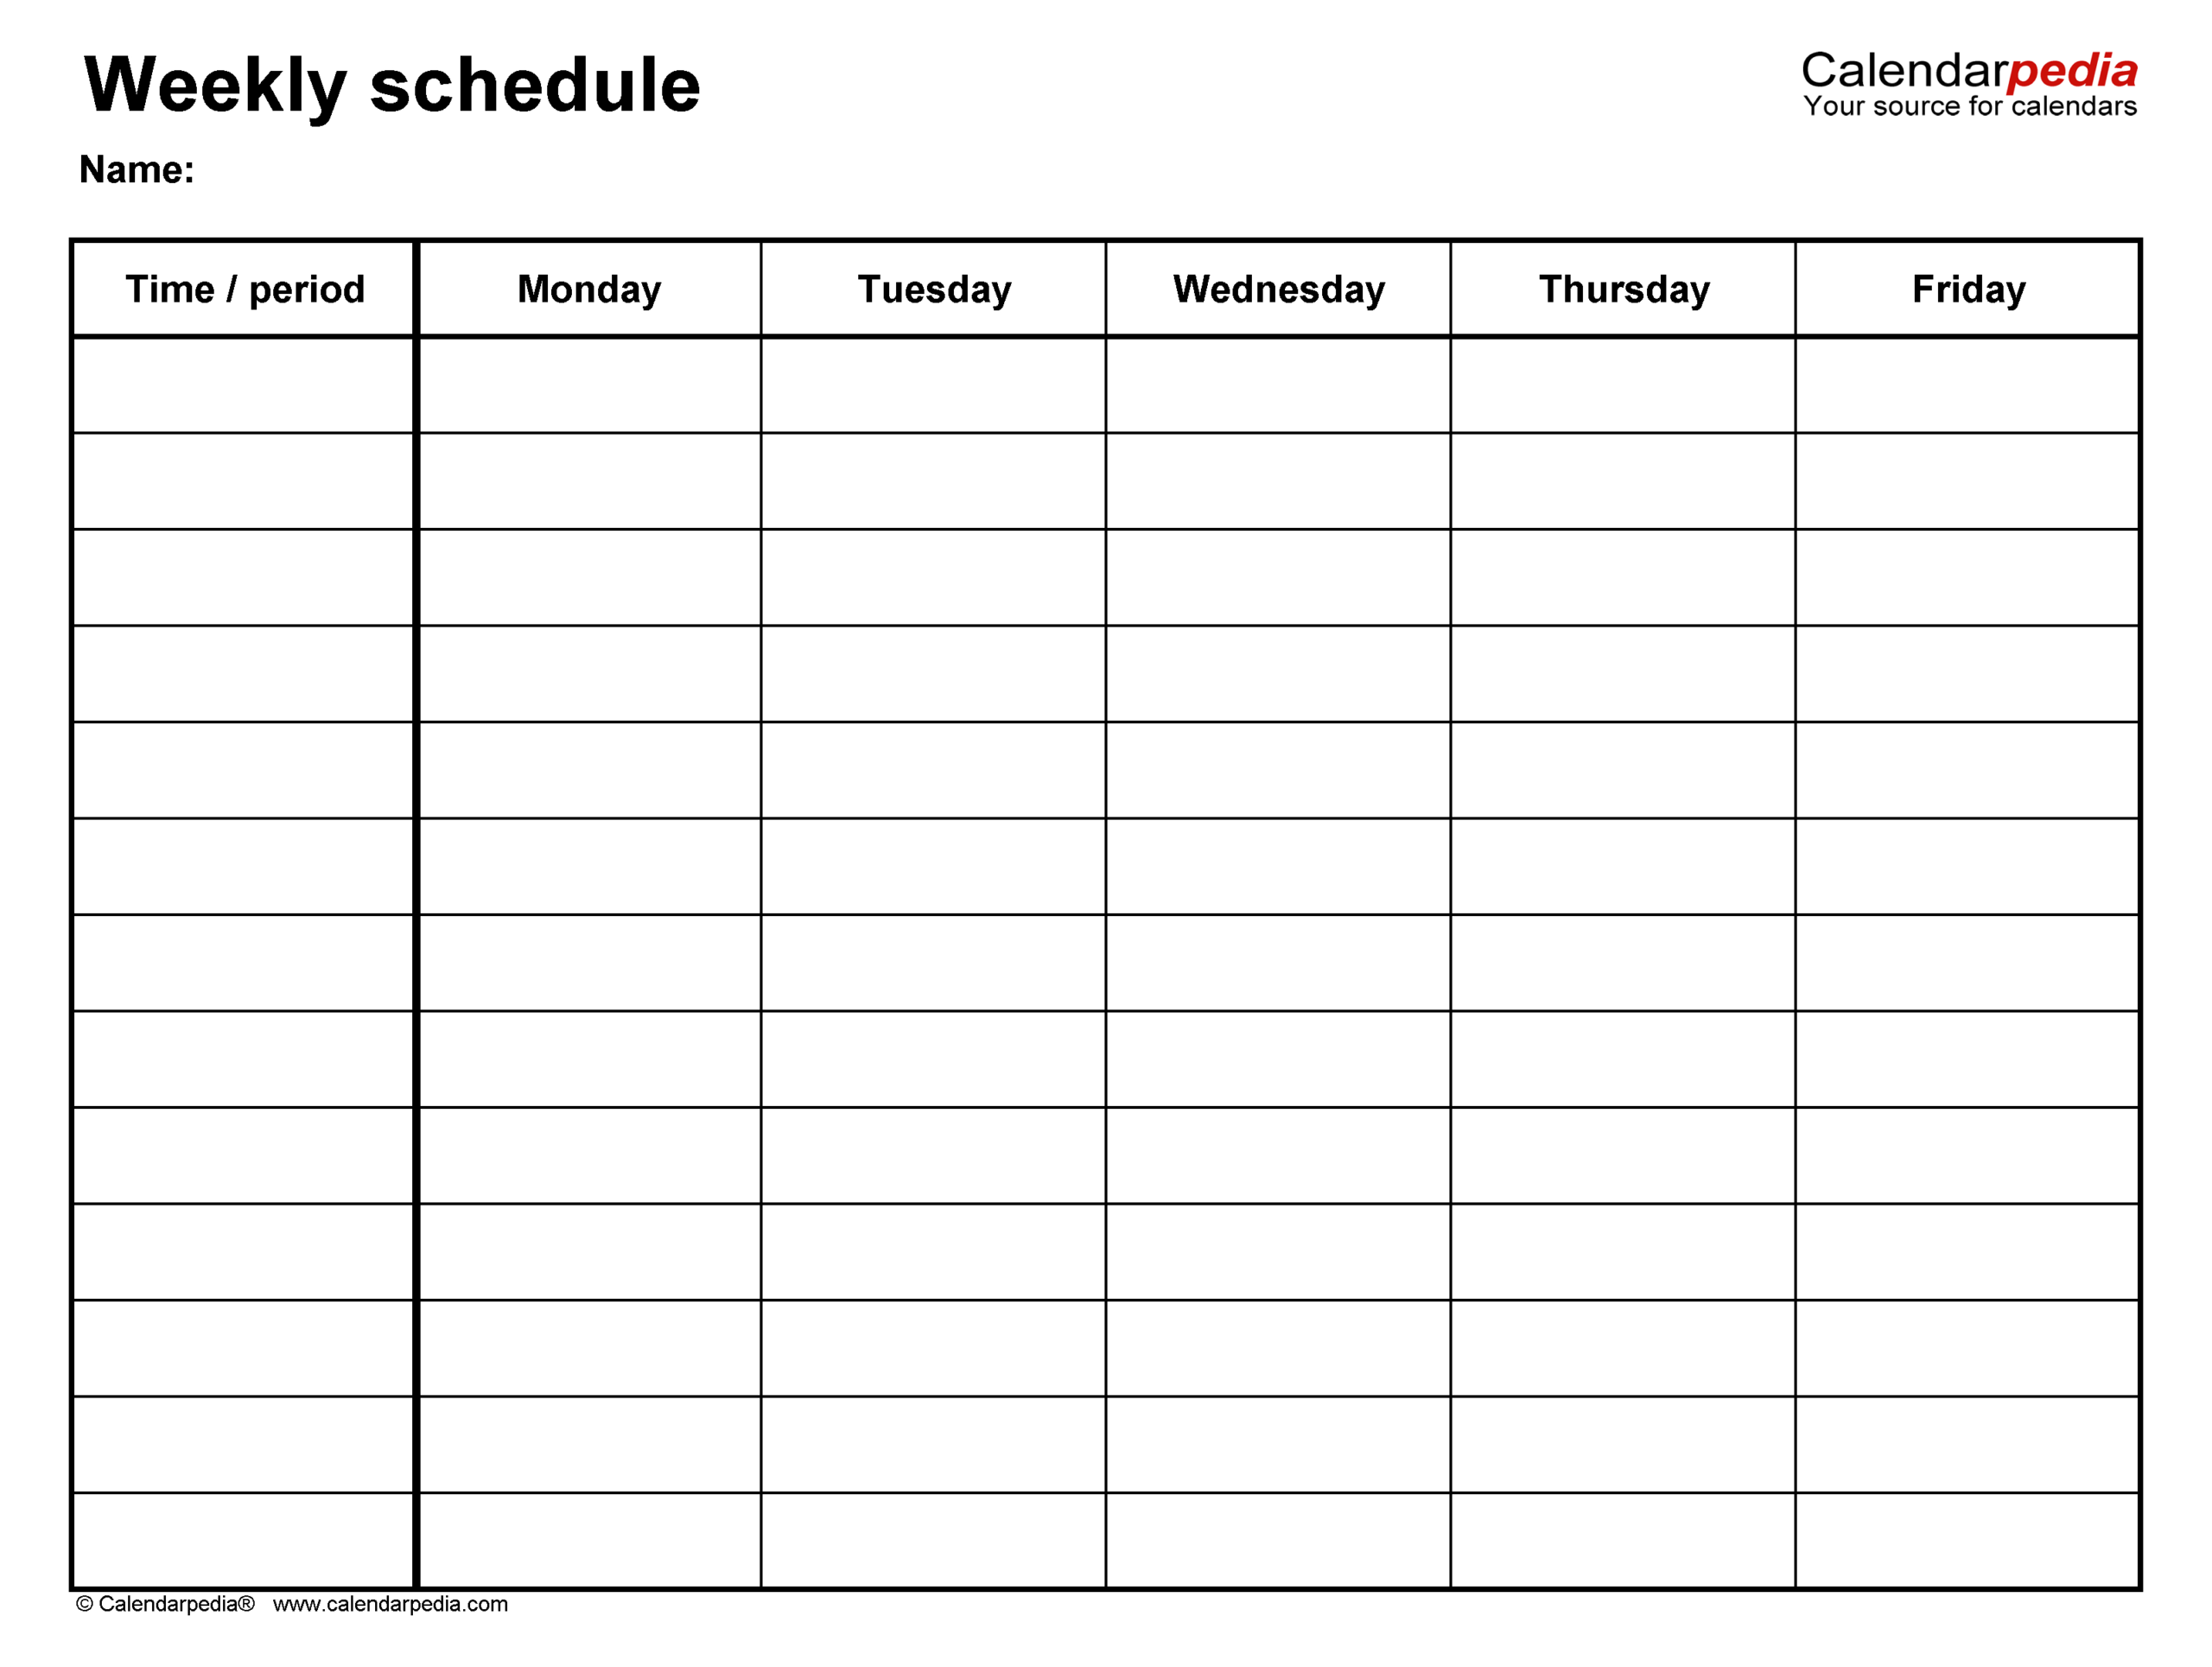 Free Weekly Schedule Templates For Word  18 Templates for Monday Through Friday Weekly Calendar Template